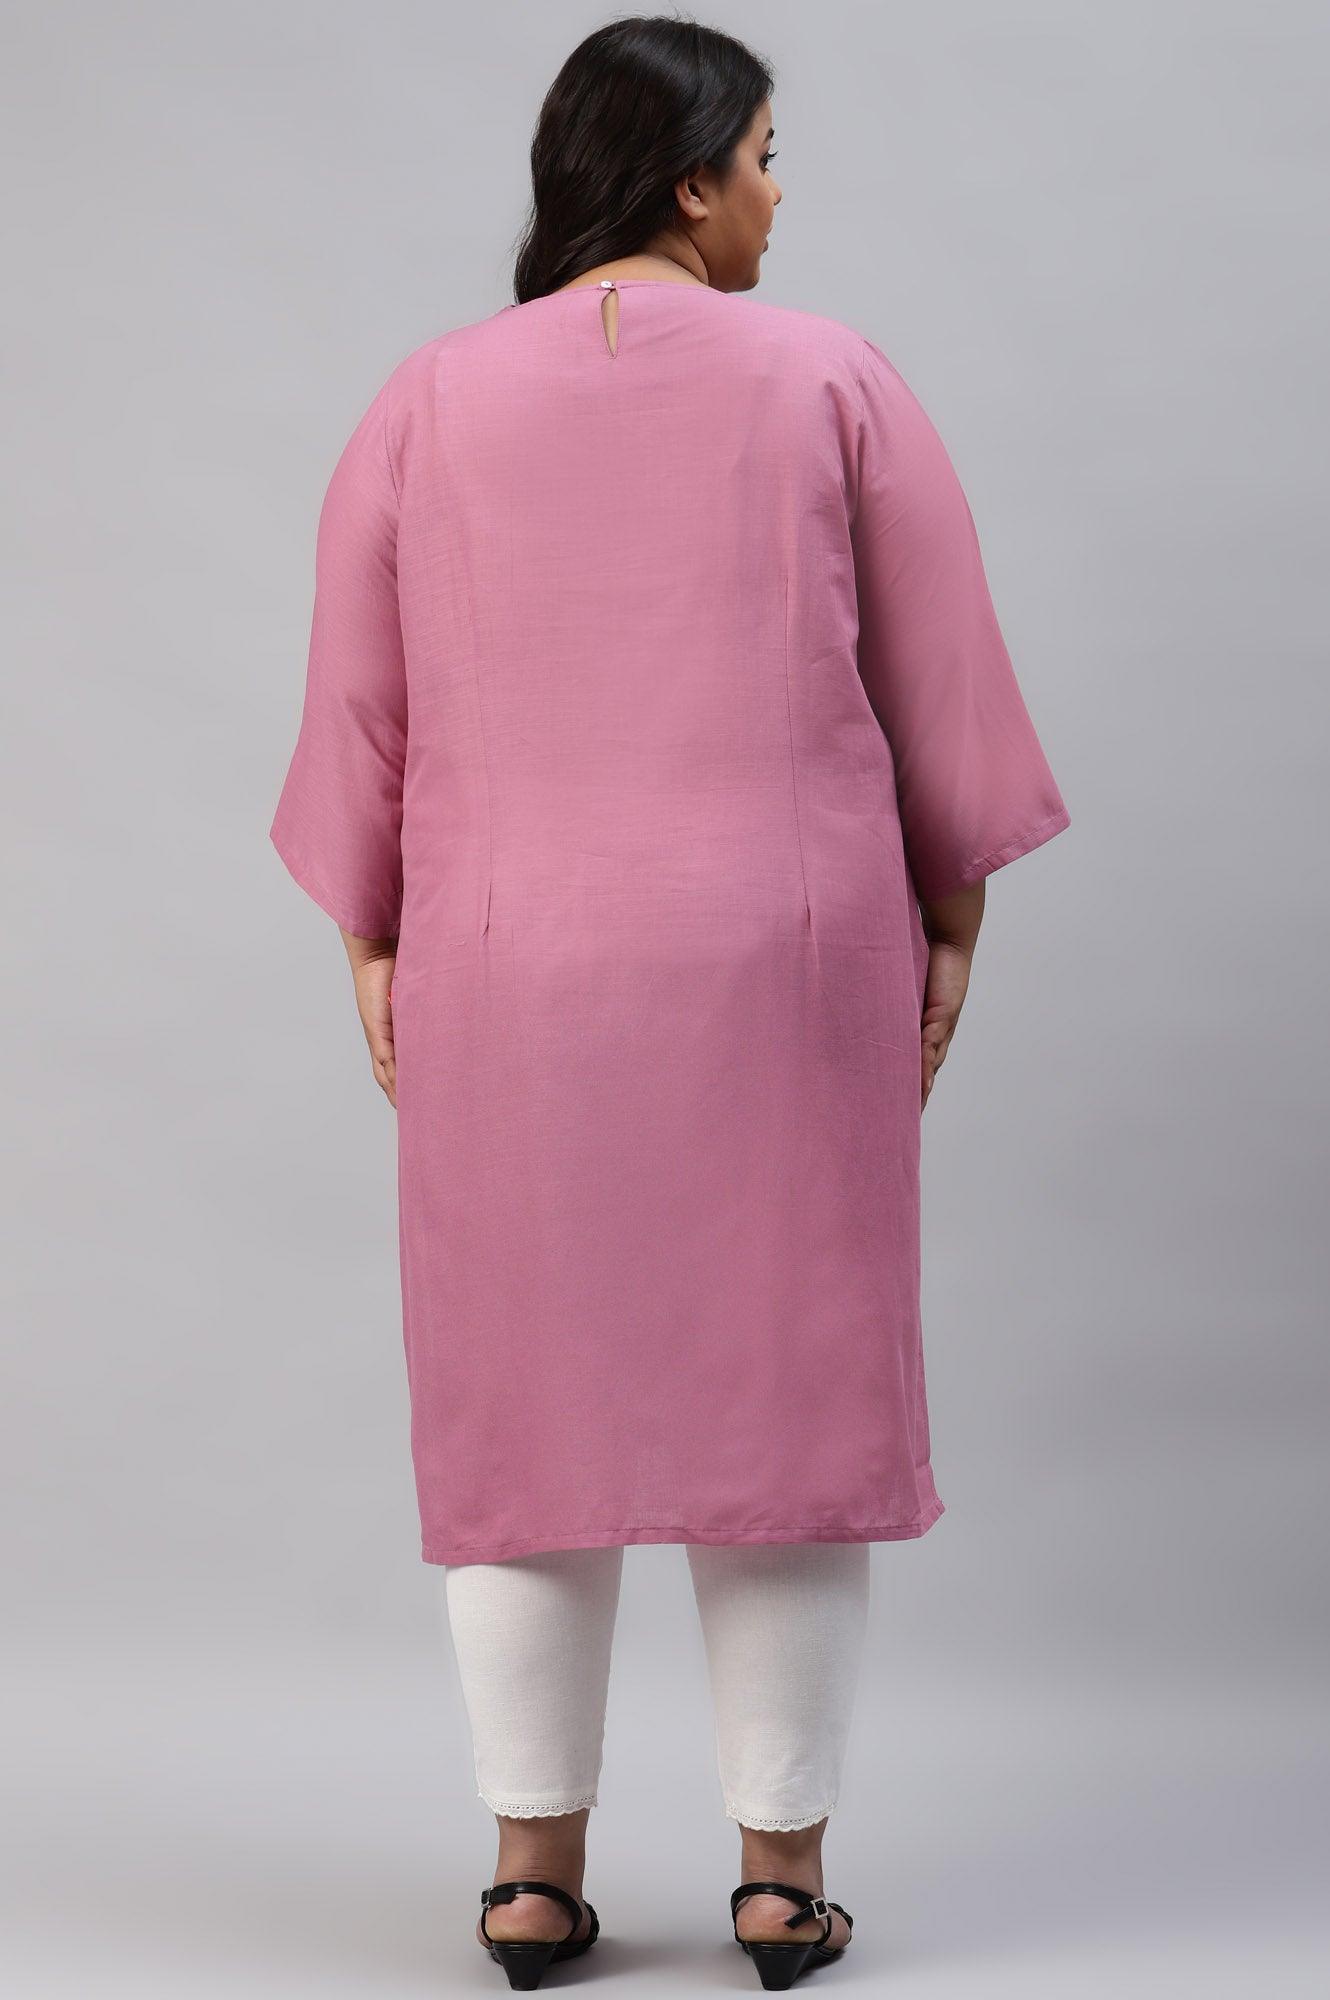 Plus Size Berry Pink Embroidered kurta With Pin Tucks - wforwoman